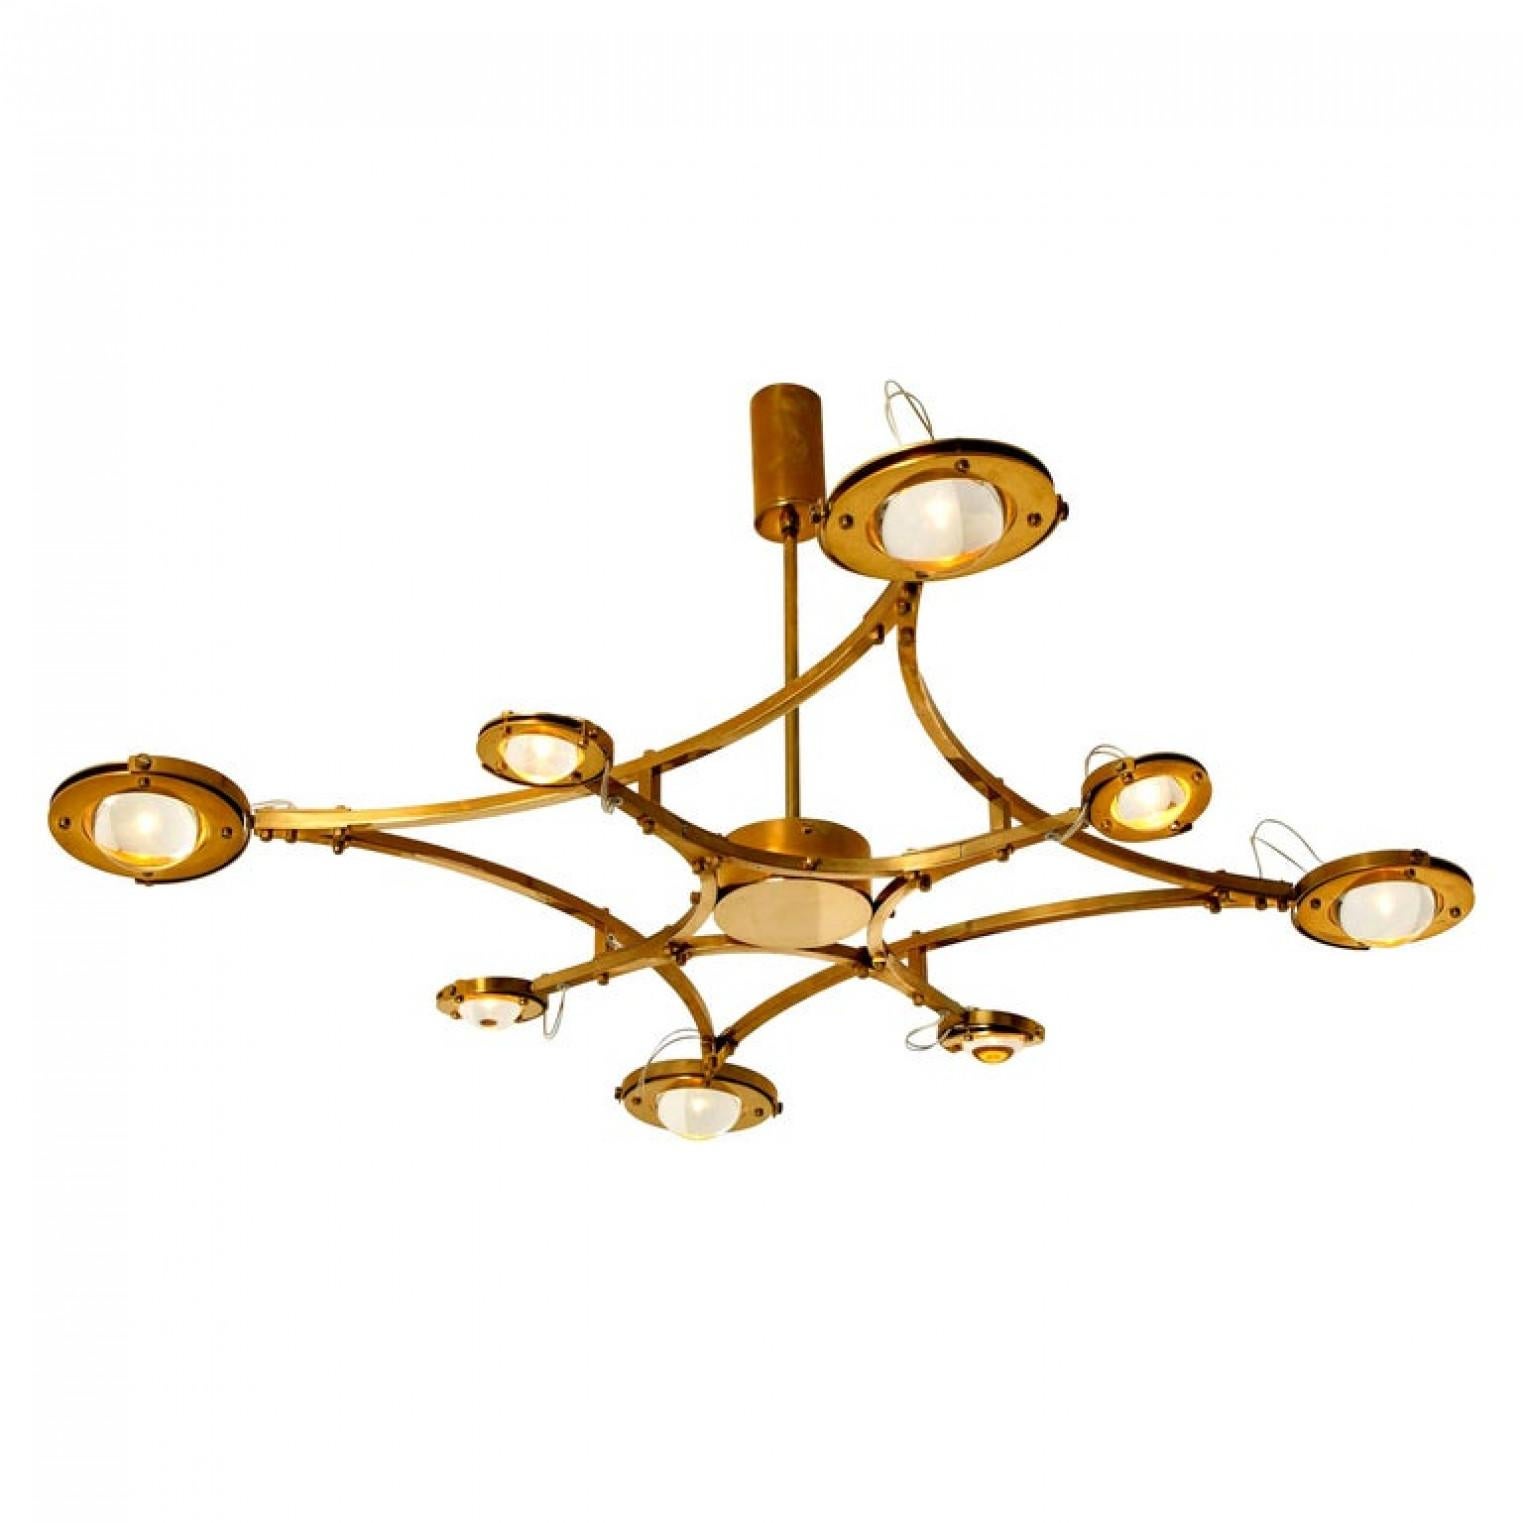 This exceptional high-end and handmade jewel lamp is made from brass. An exceptional detail on this flush mount is the lens light. Each lens is flexible and rotates freely in any direction. A stunning light partition on ceiling and room. A